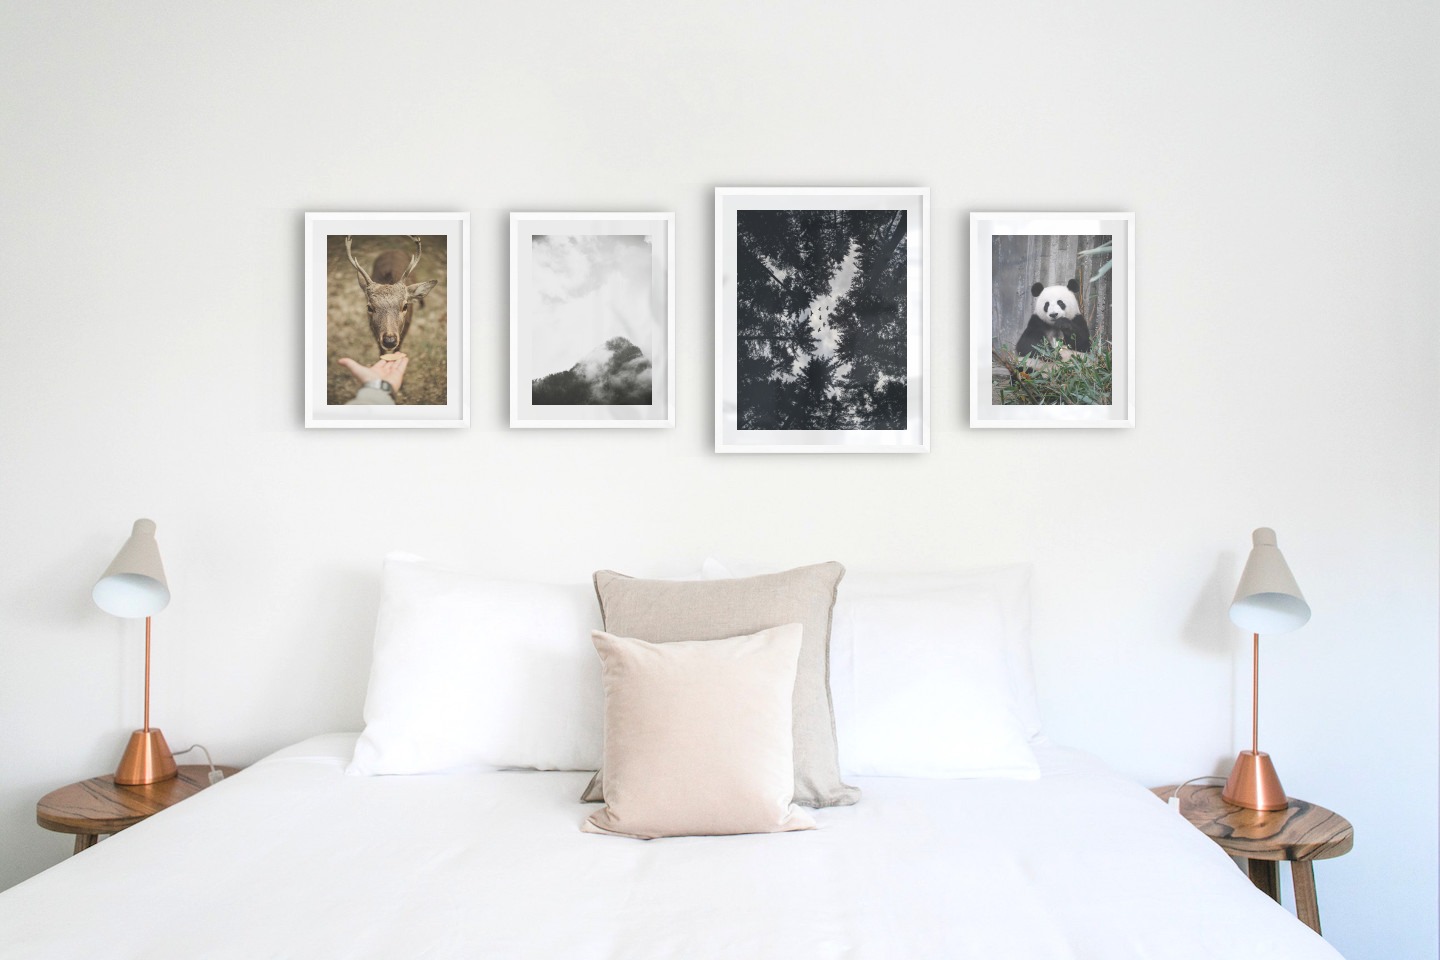 Gallery wall with picture frames in white in sizes 30x40 and 40x50 with prints "Feed a deer", "Trees and mountains in fog", "Wooden tops and birds" and "Panda"